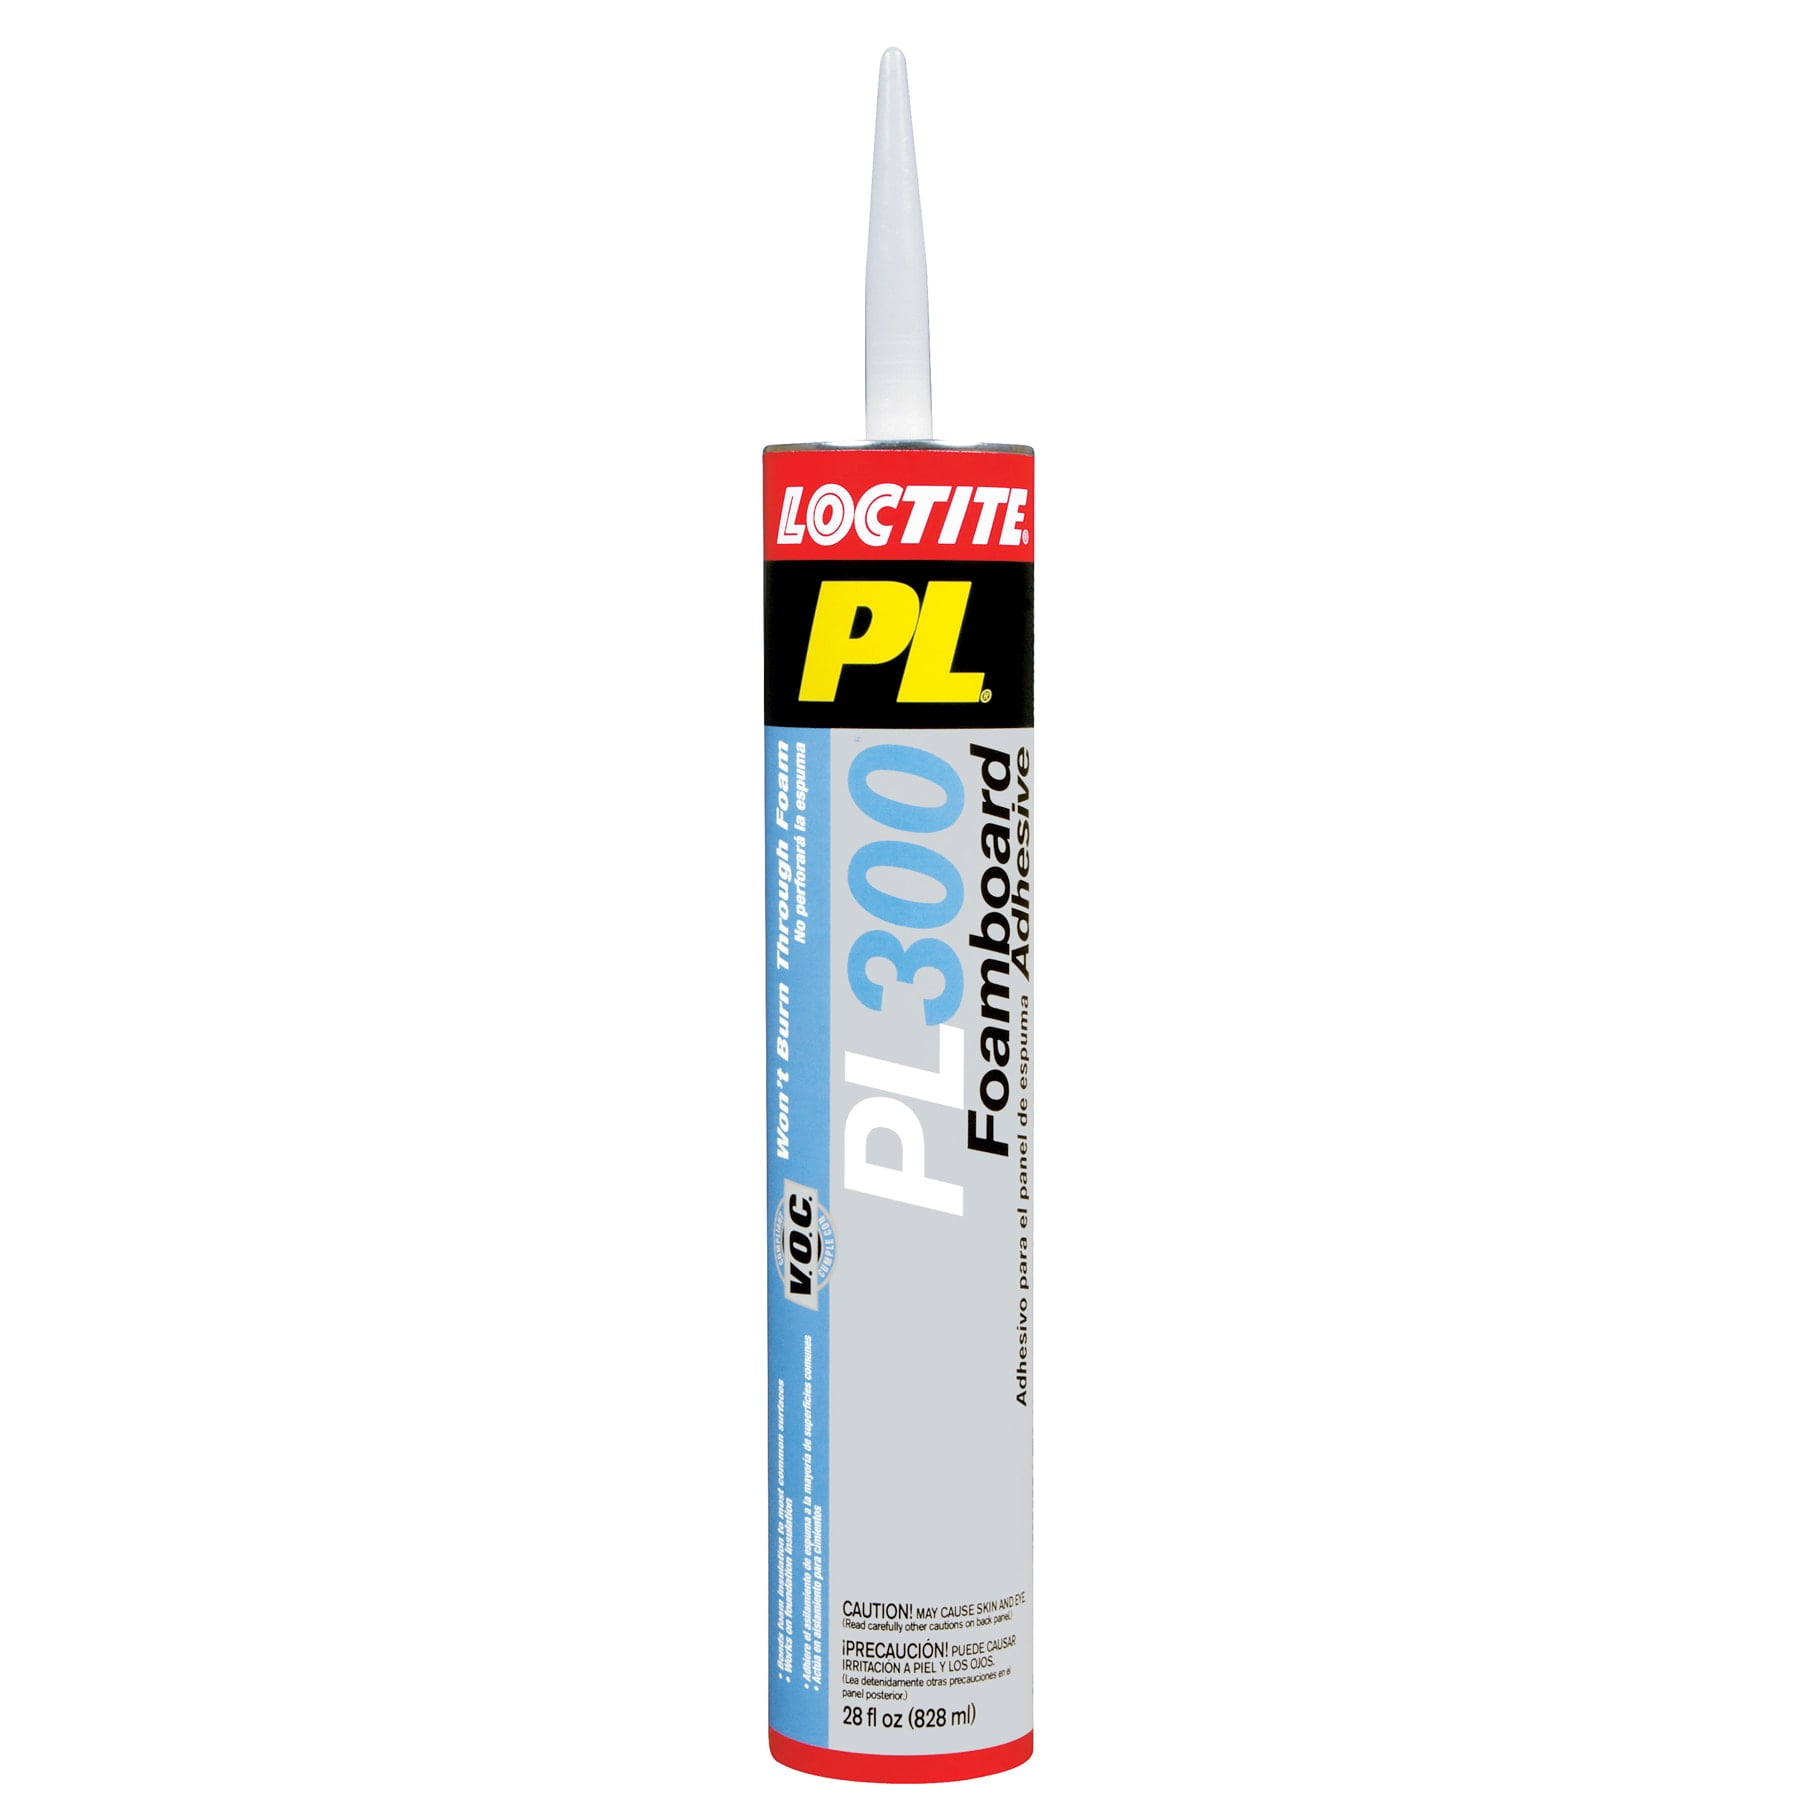 Loctite PL 300 Foamboard 10 oz. Latex Construction Adhesive Blue Cartridge  (each) 1421941 - The Home Depot